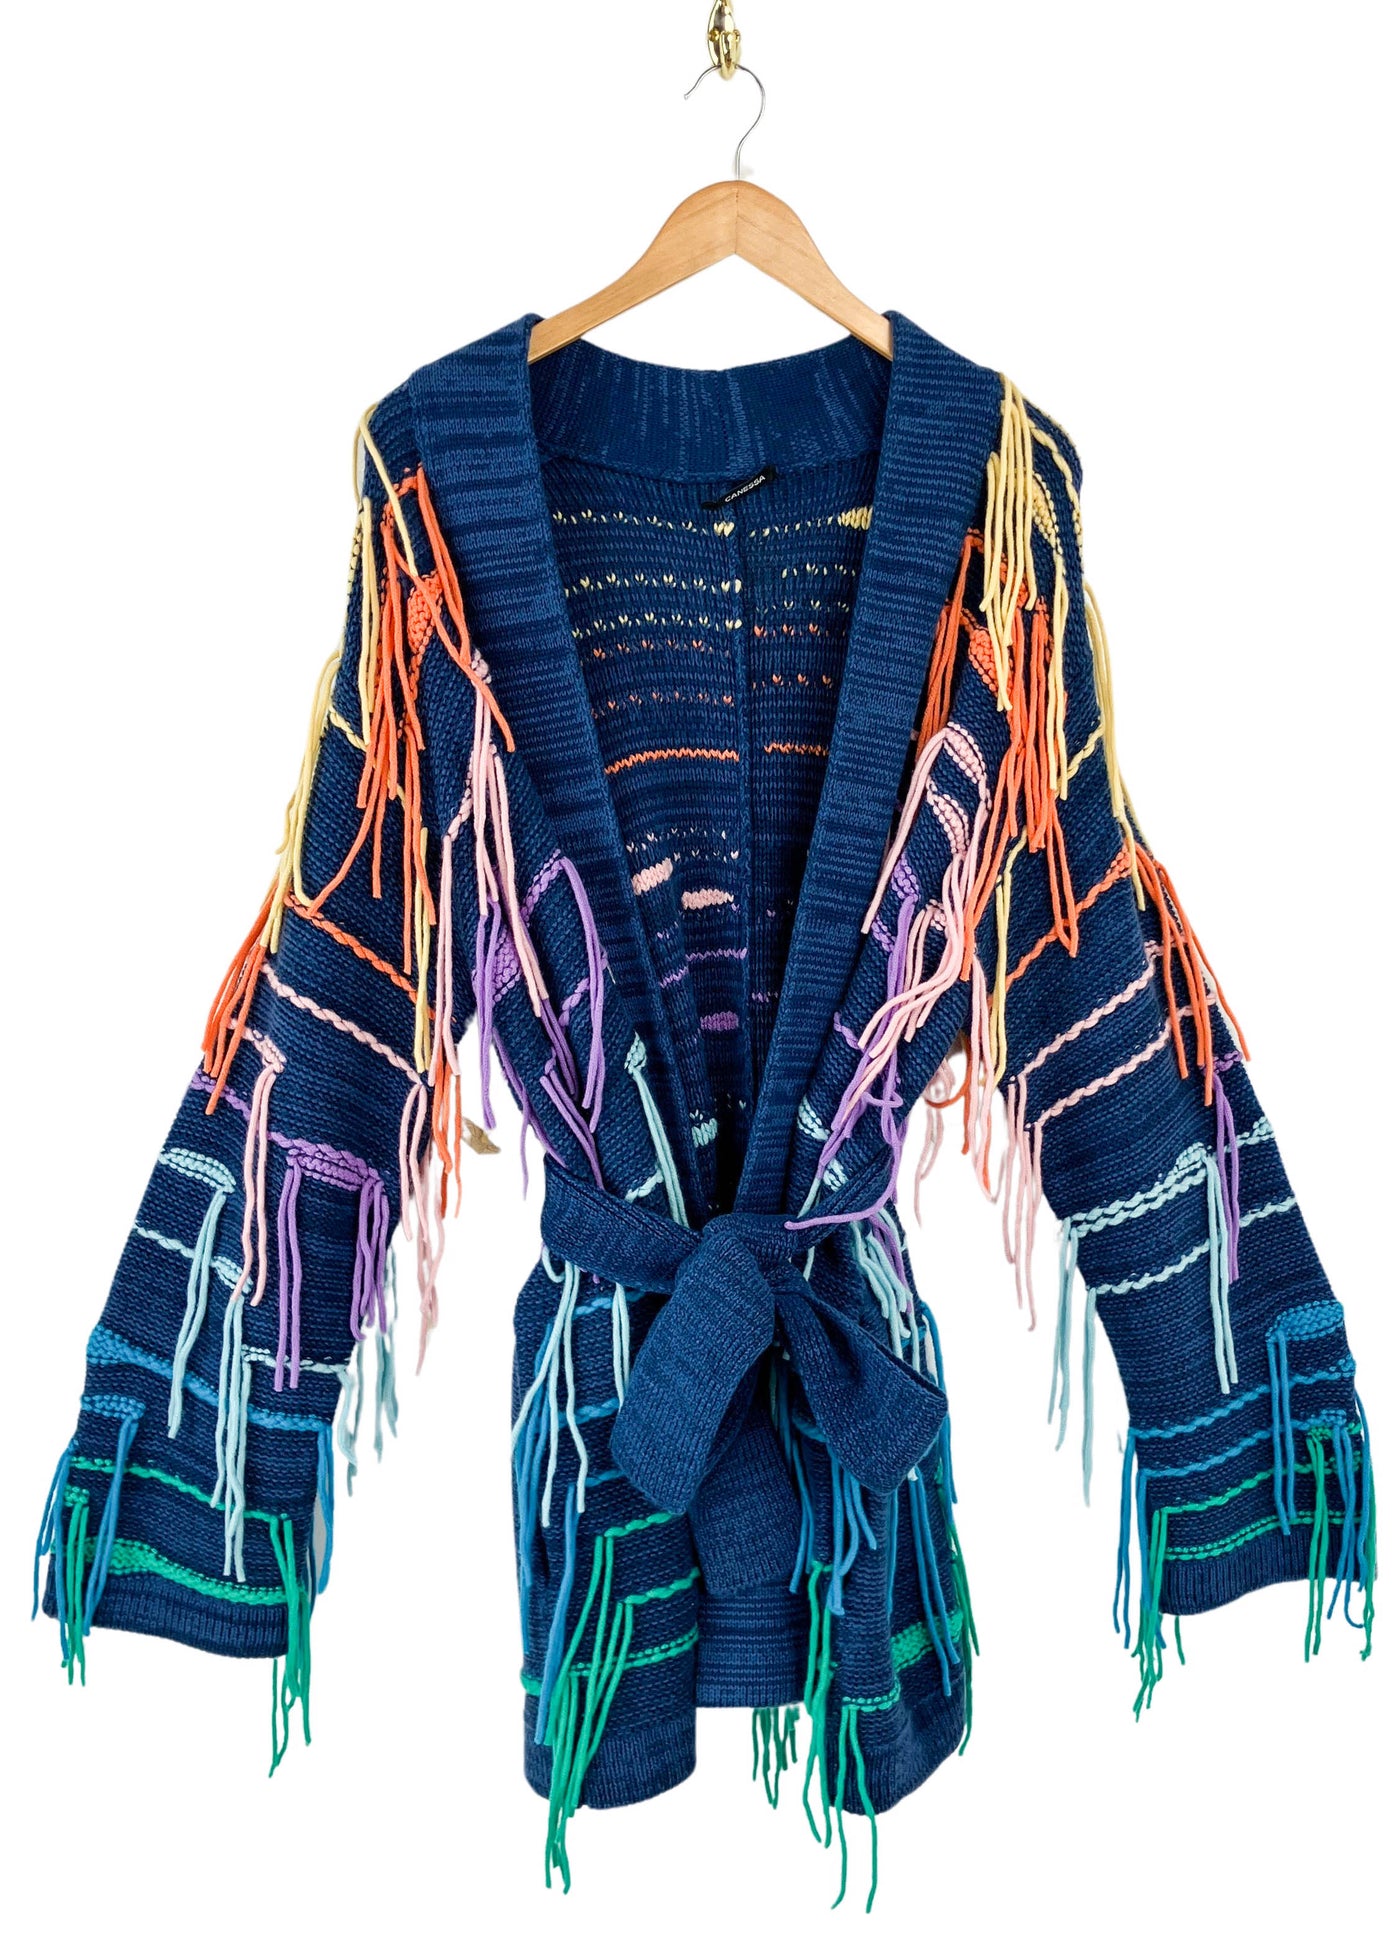 Canessa Fringe Cardigan in Blue Multi - Discounts on Canessa at UAL